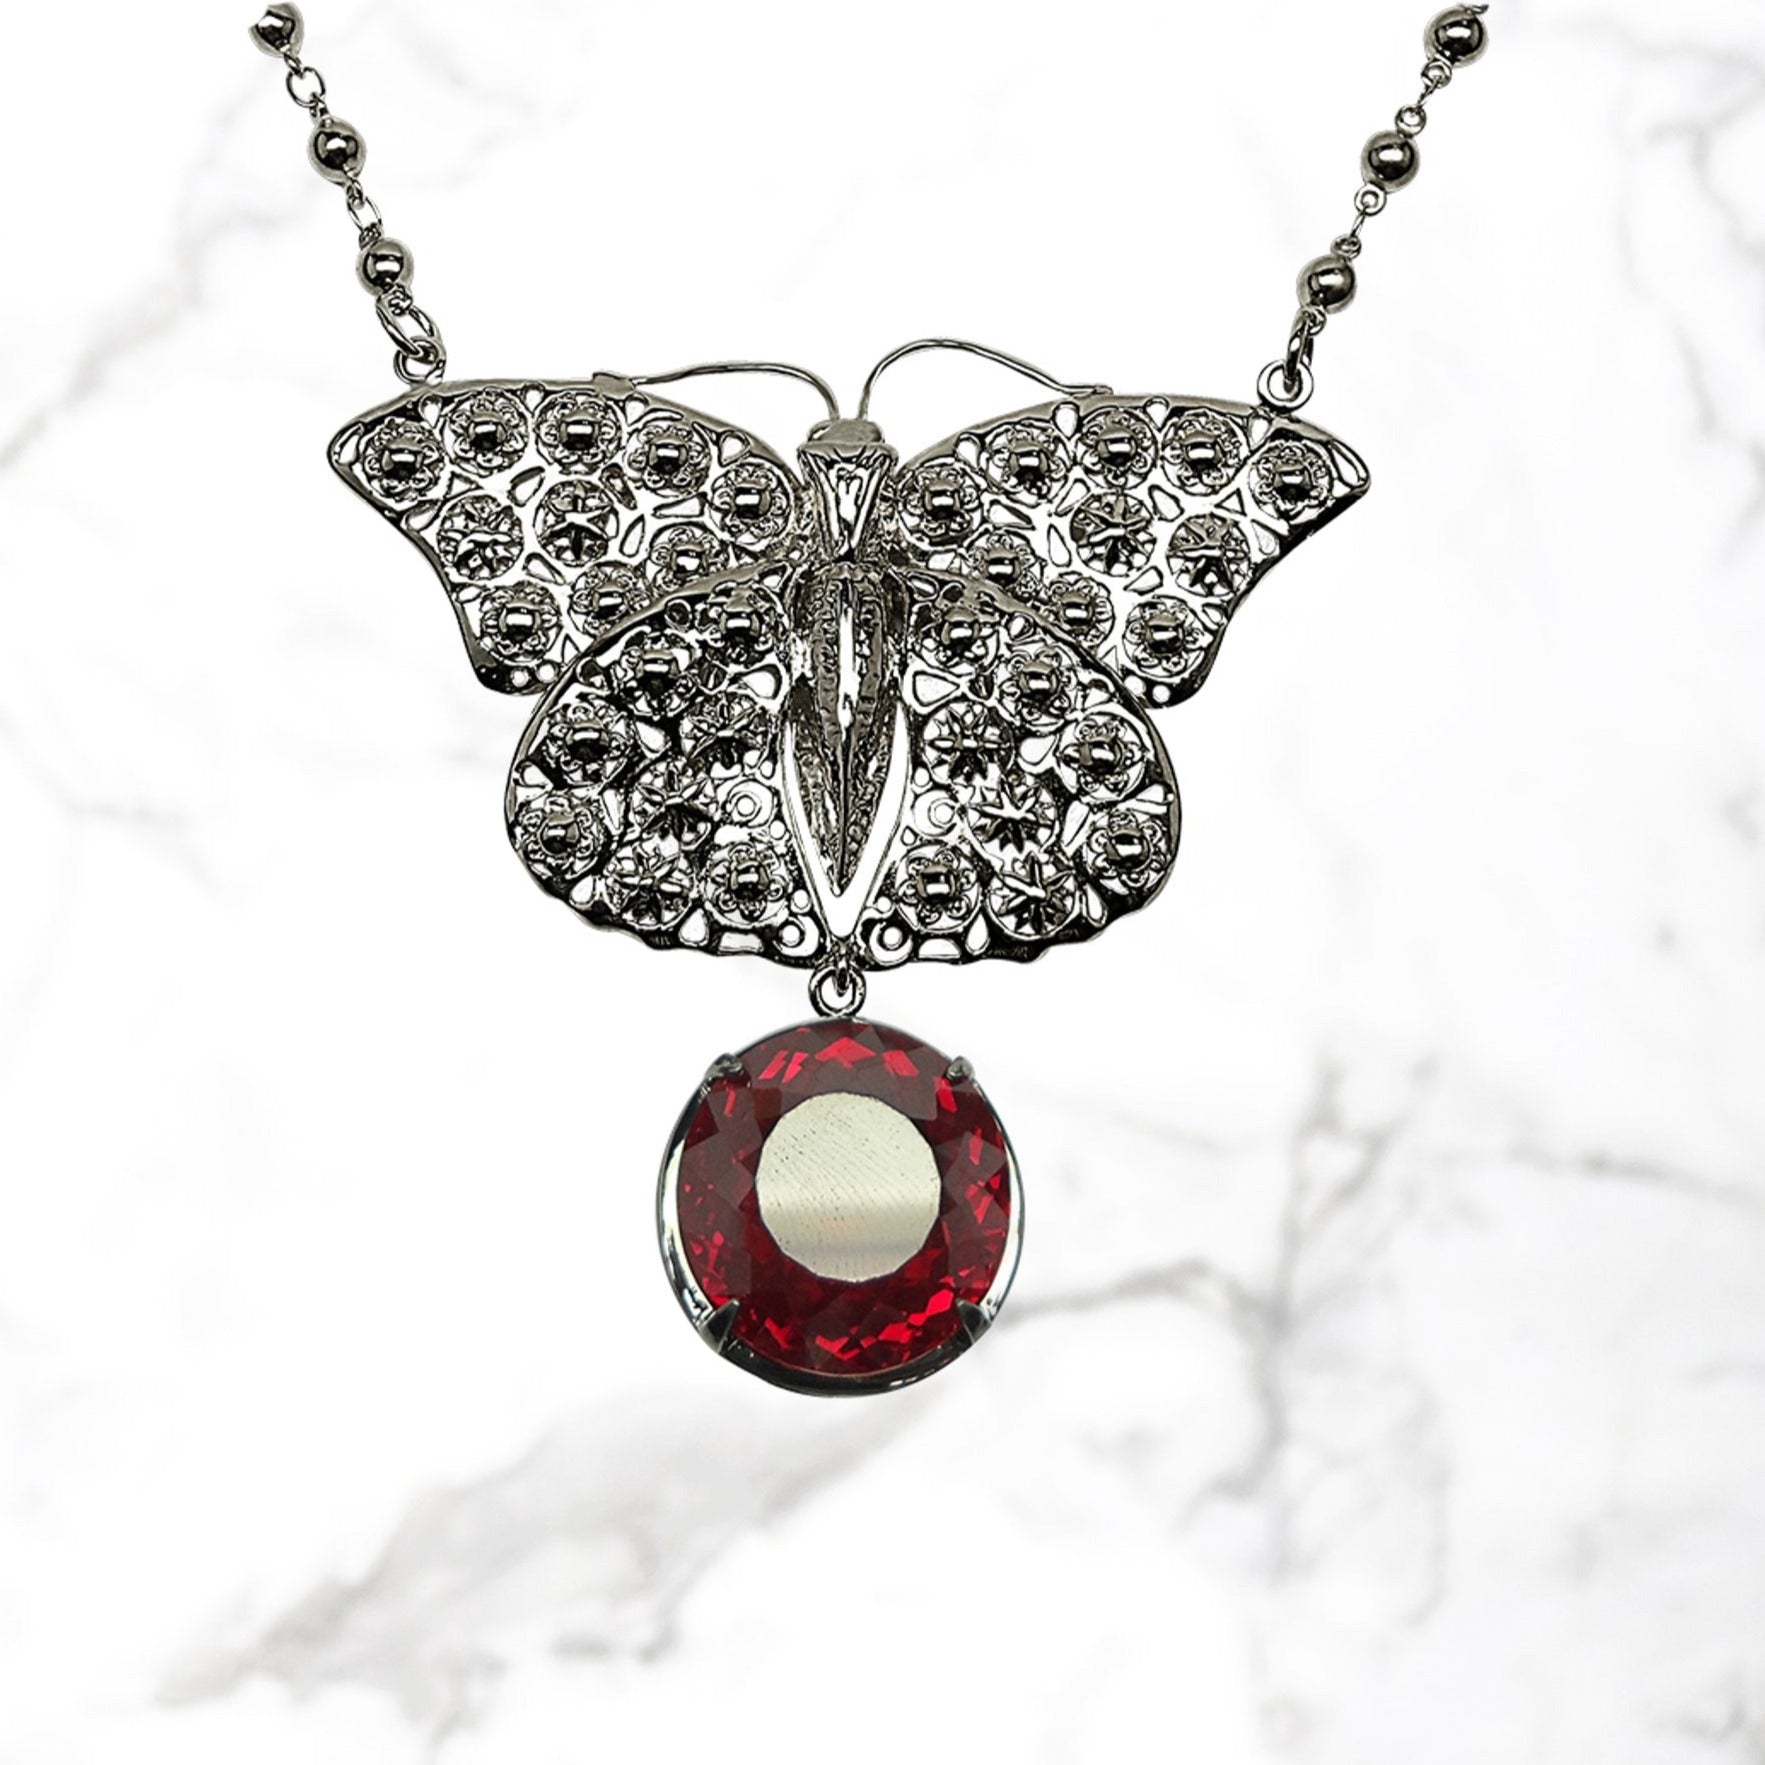 M2 butterfly pendant necklace